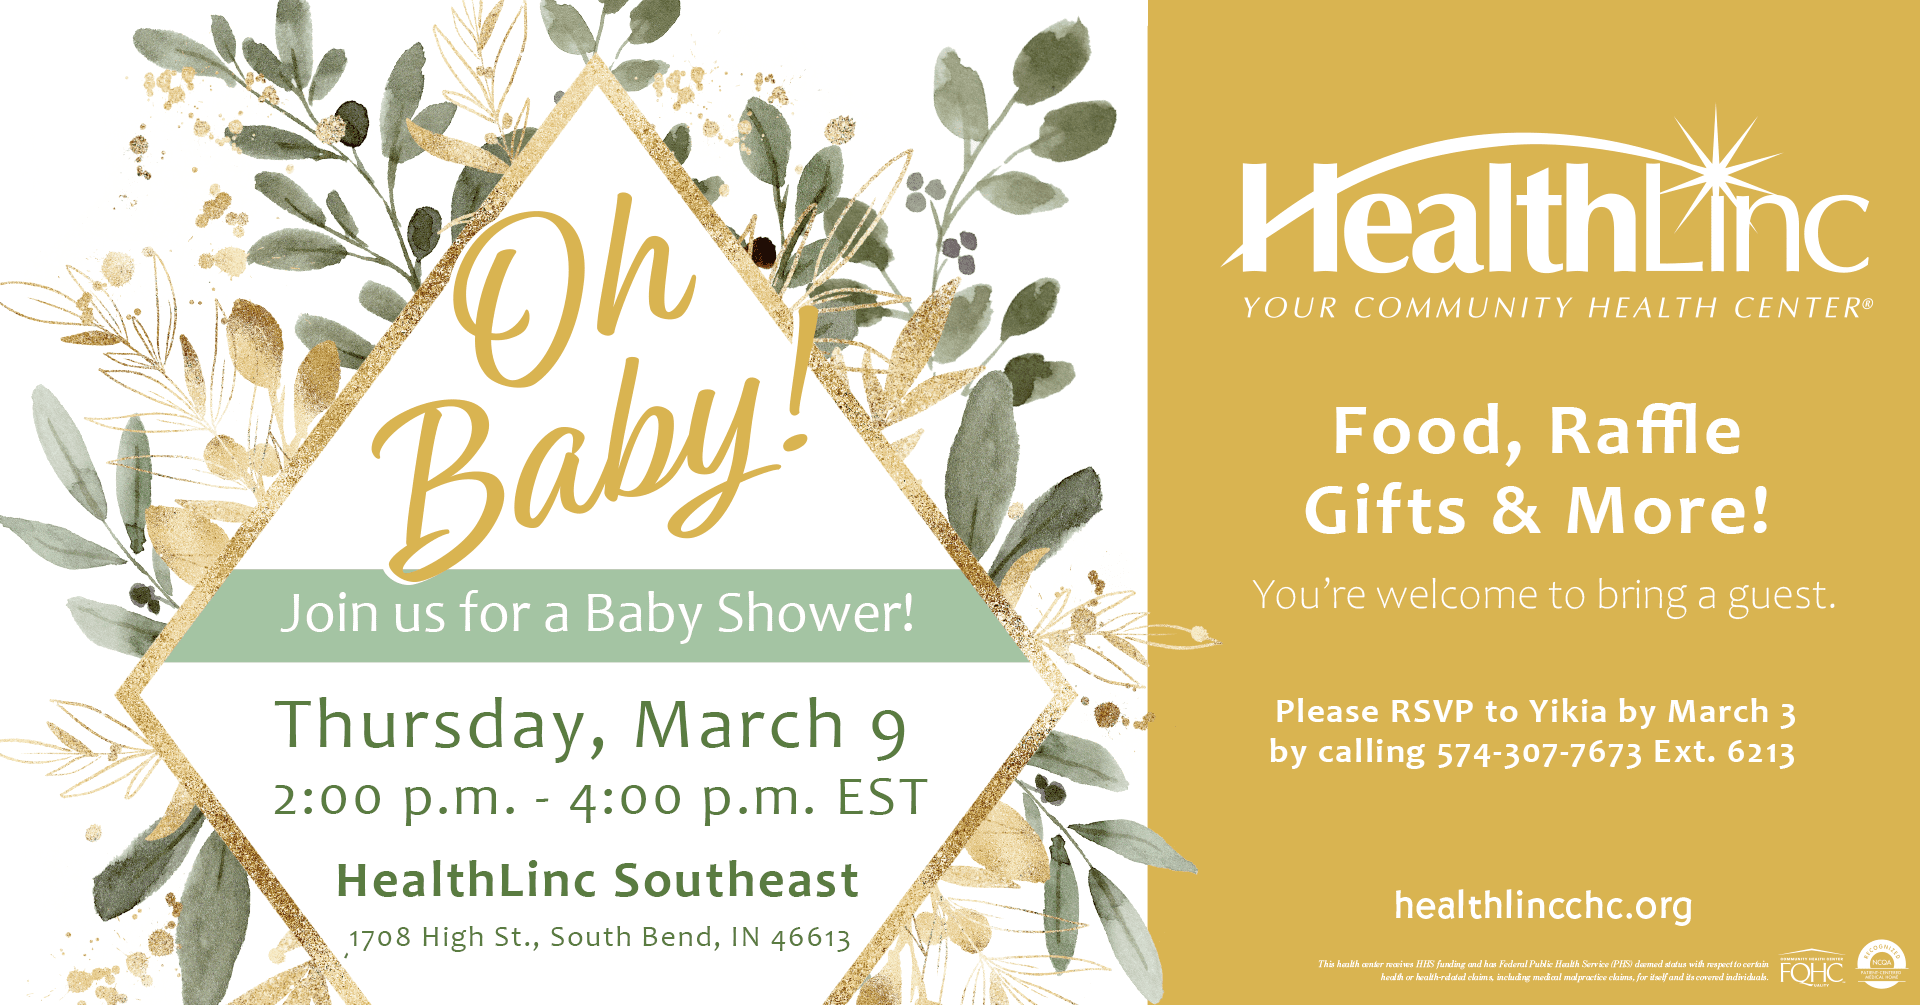 A banner for the baby shower at HealthLinc Southeast on March 9 from 2-4 p.m. EST at 1708 High St., South Bend, IN.